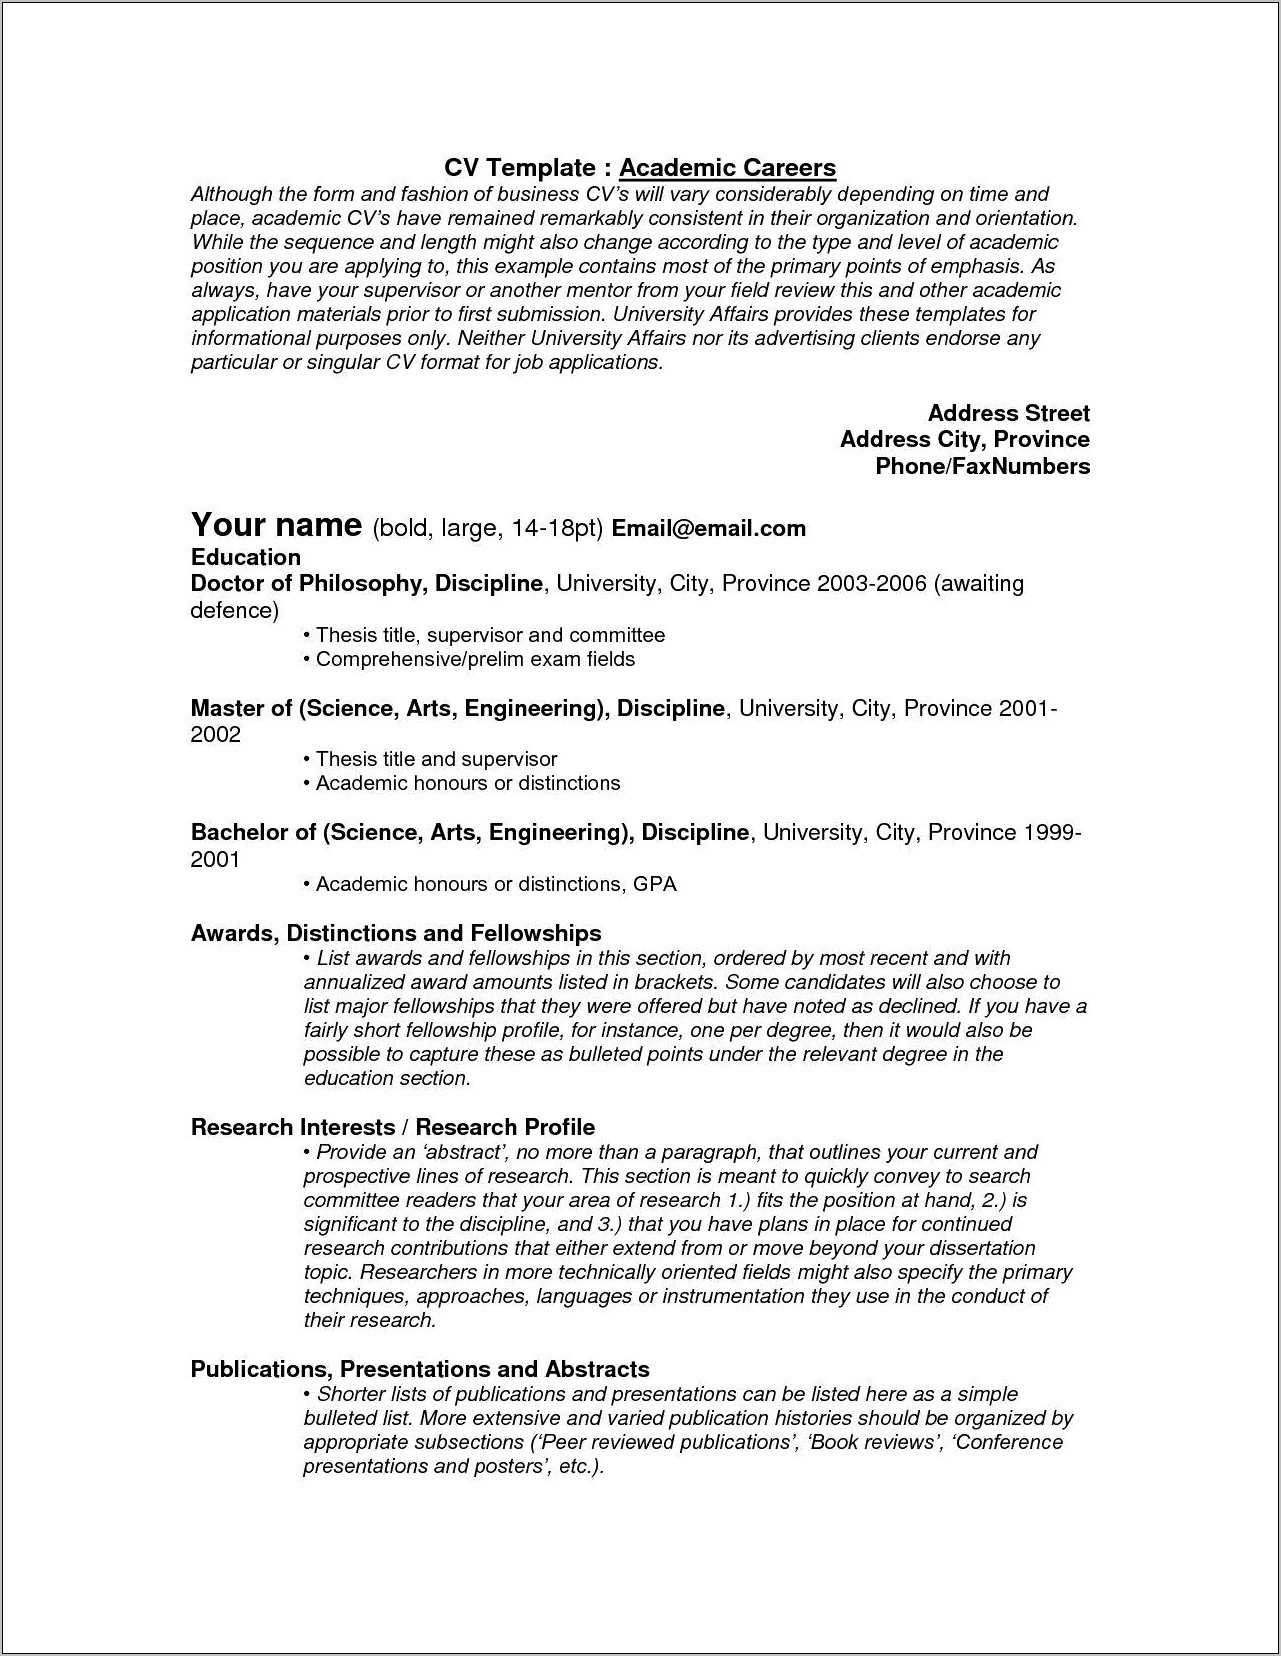 Examples Of Conference Presentations On Resumes